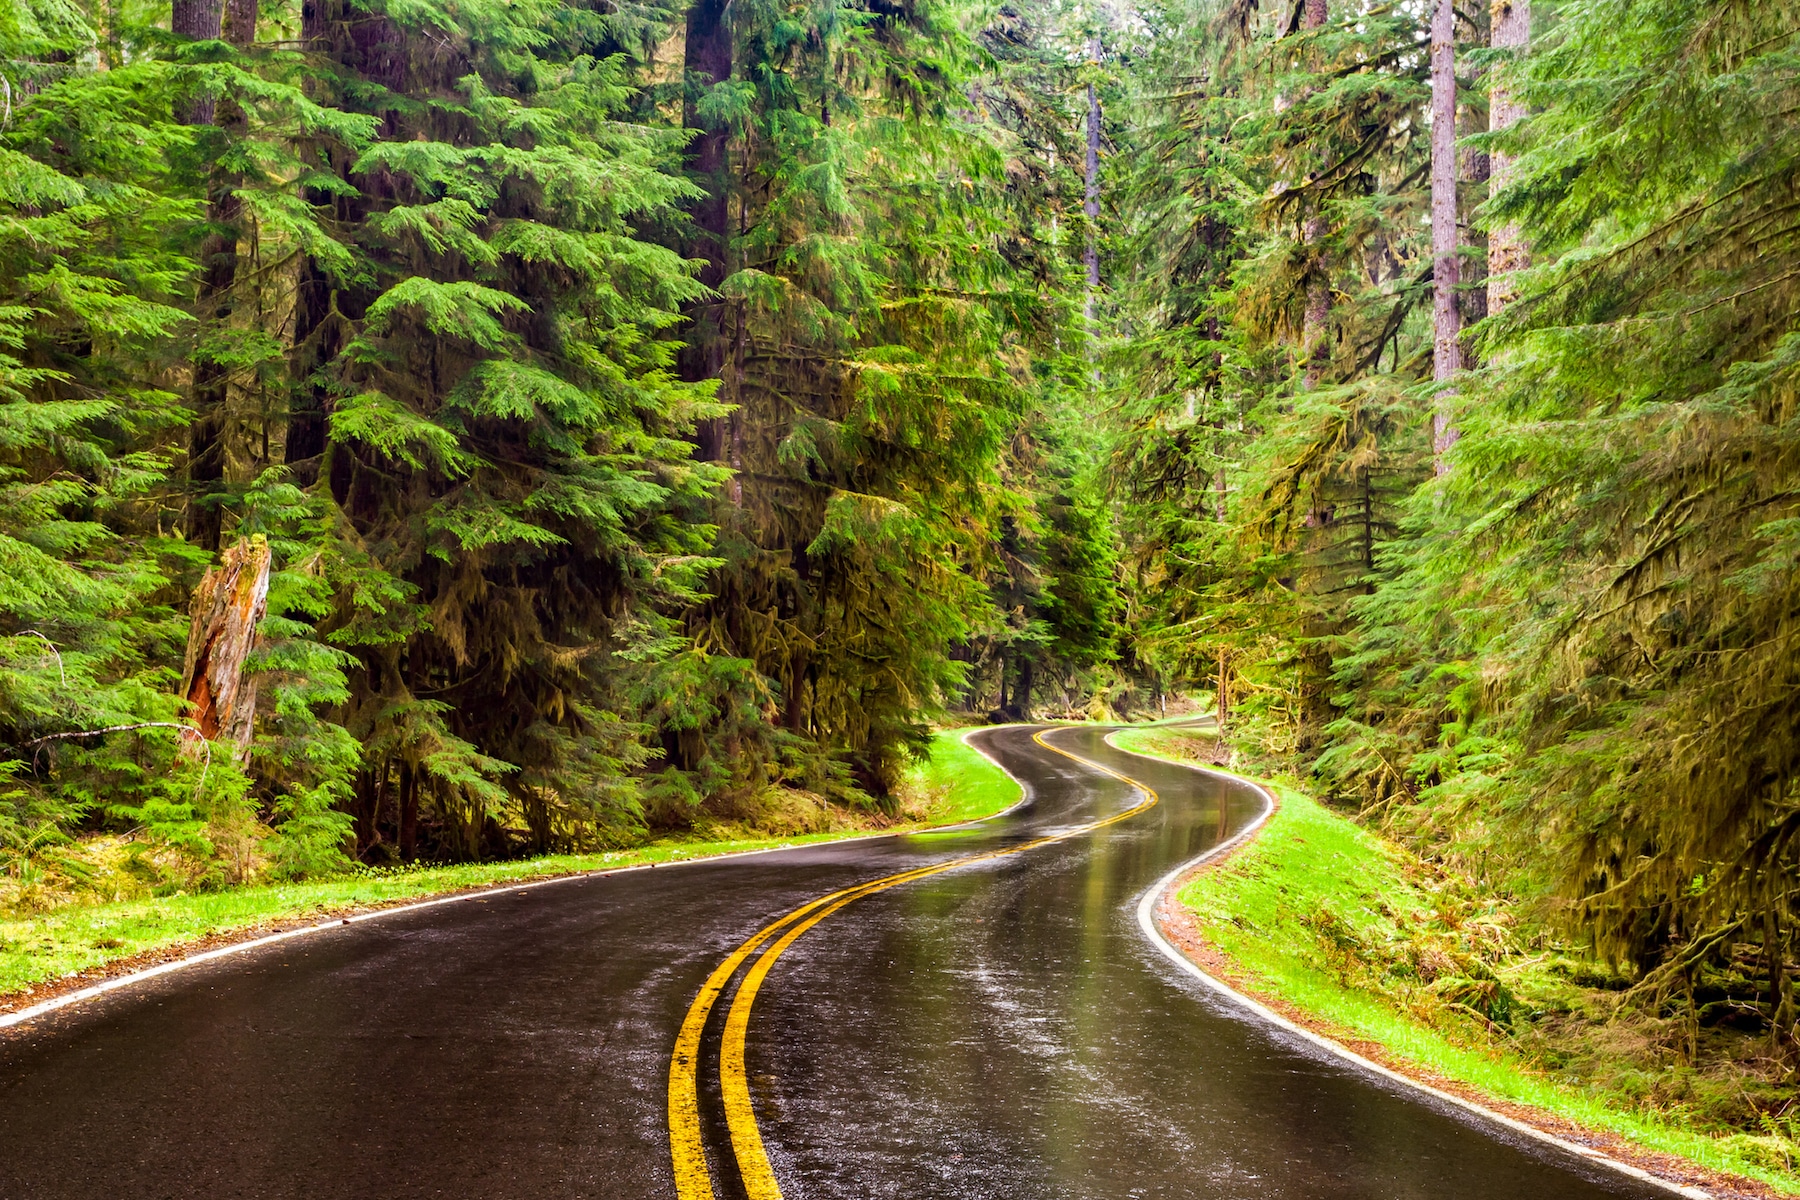 Wet winding road through a lush green forest in the Pacific Northwest